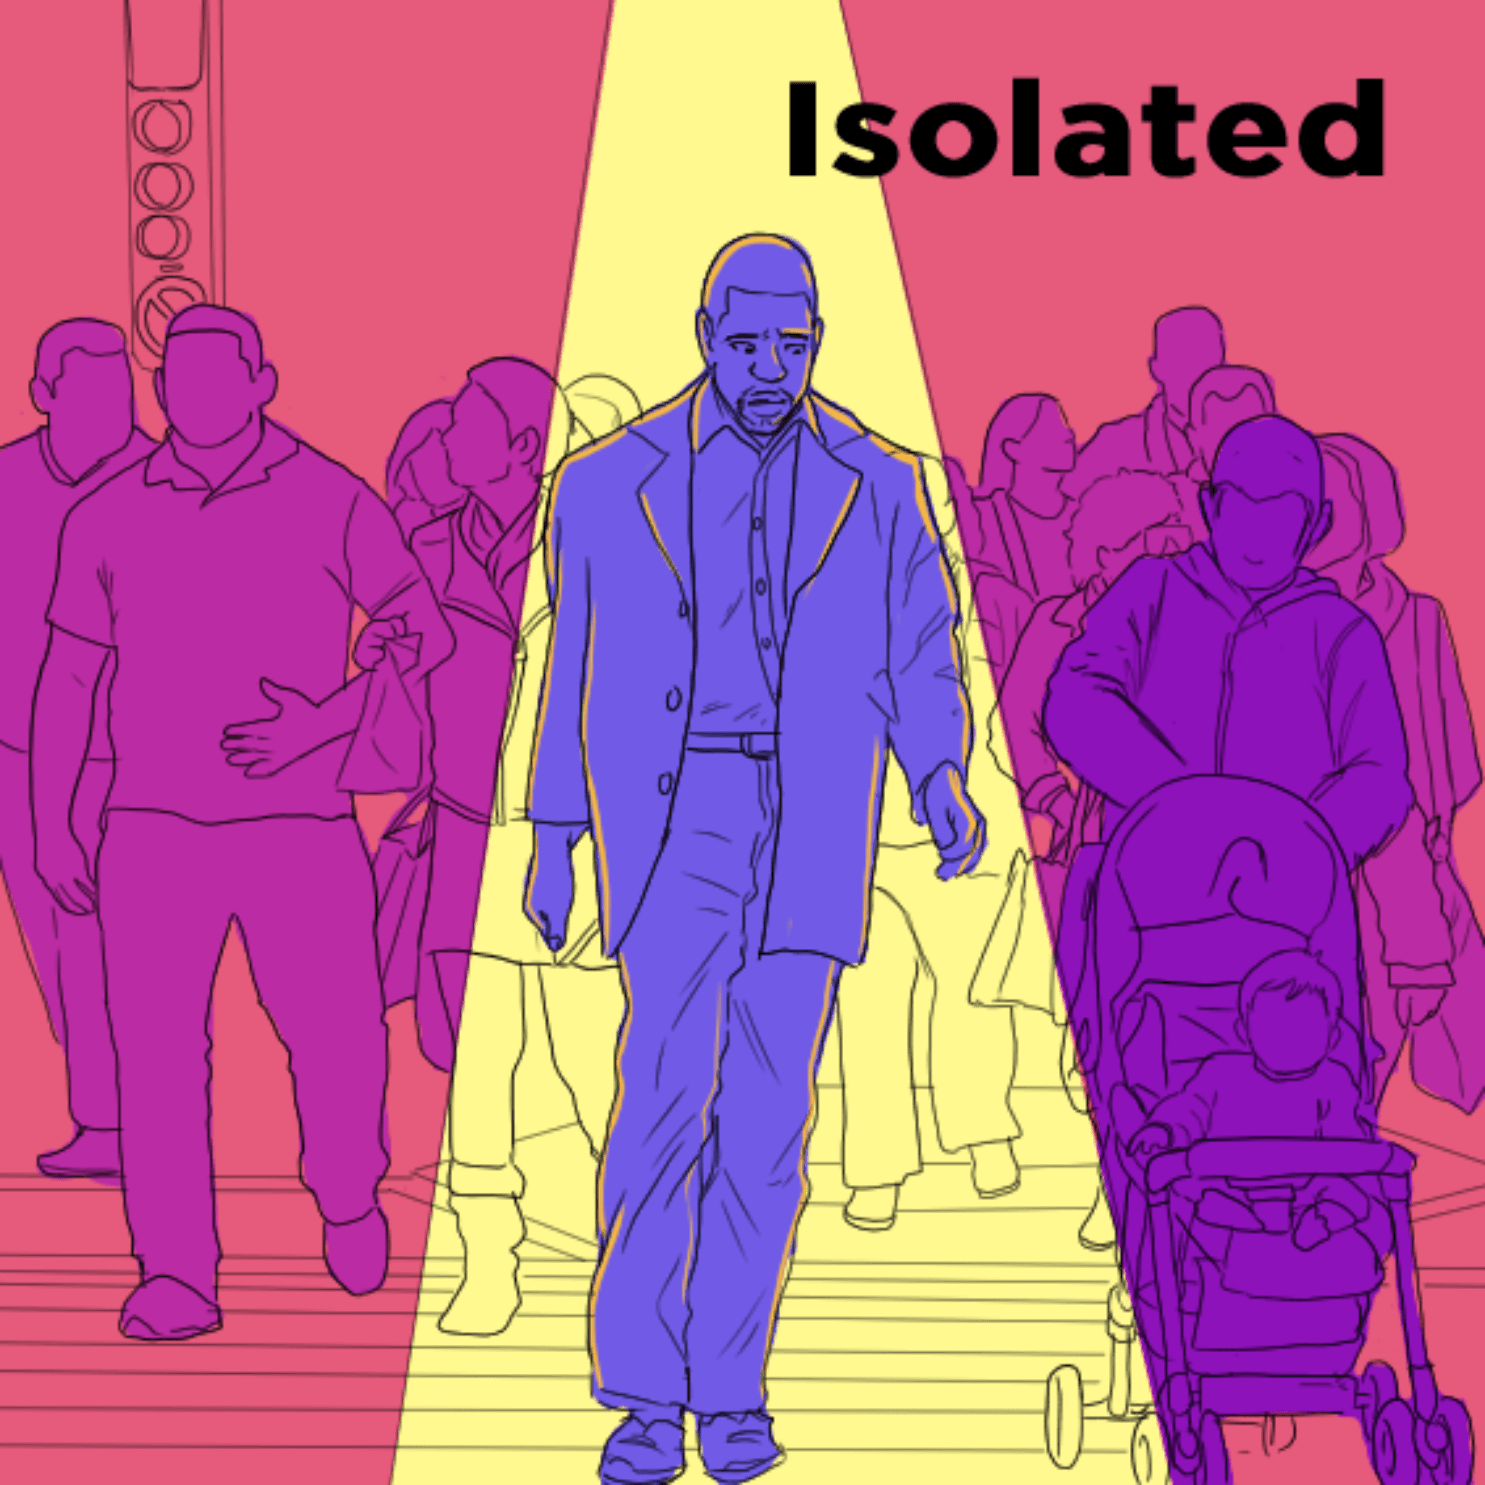 Thumbnail for "Isolated: The Silence Around Male Infertility".